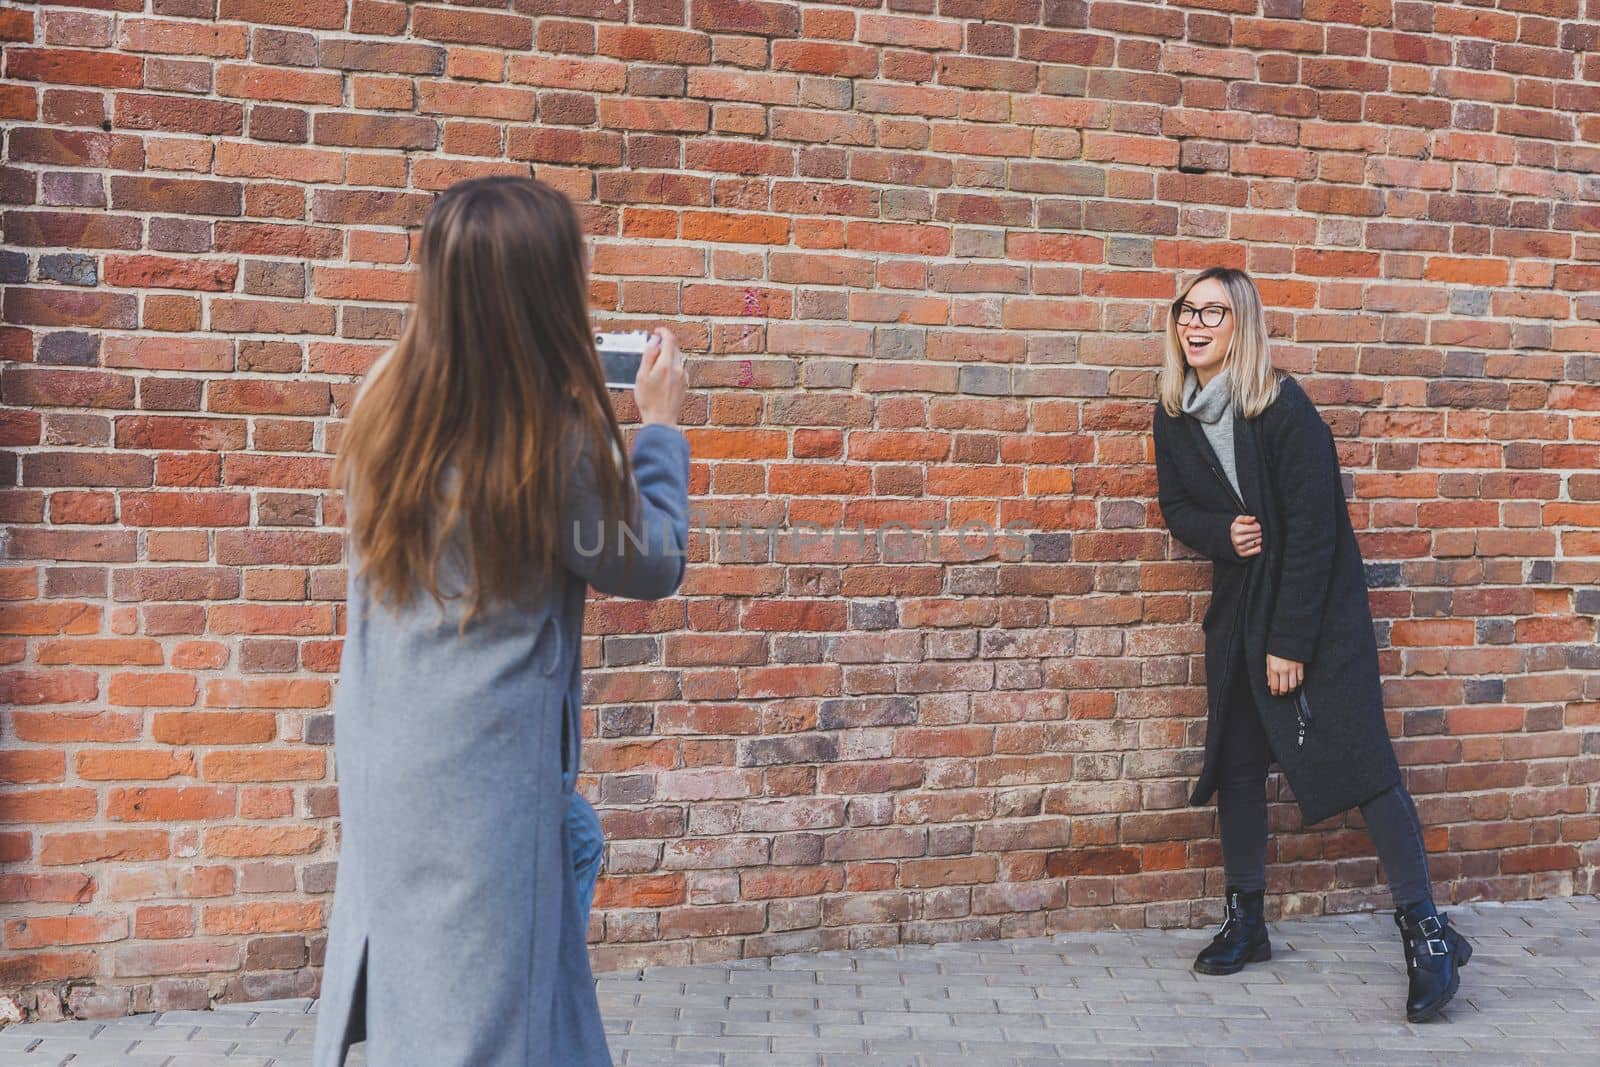 Girl takes picture of her female friend in front of brick wall